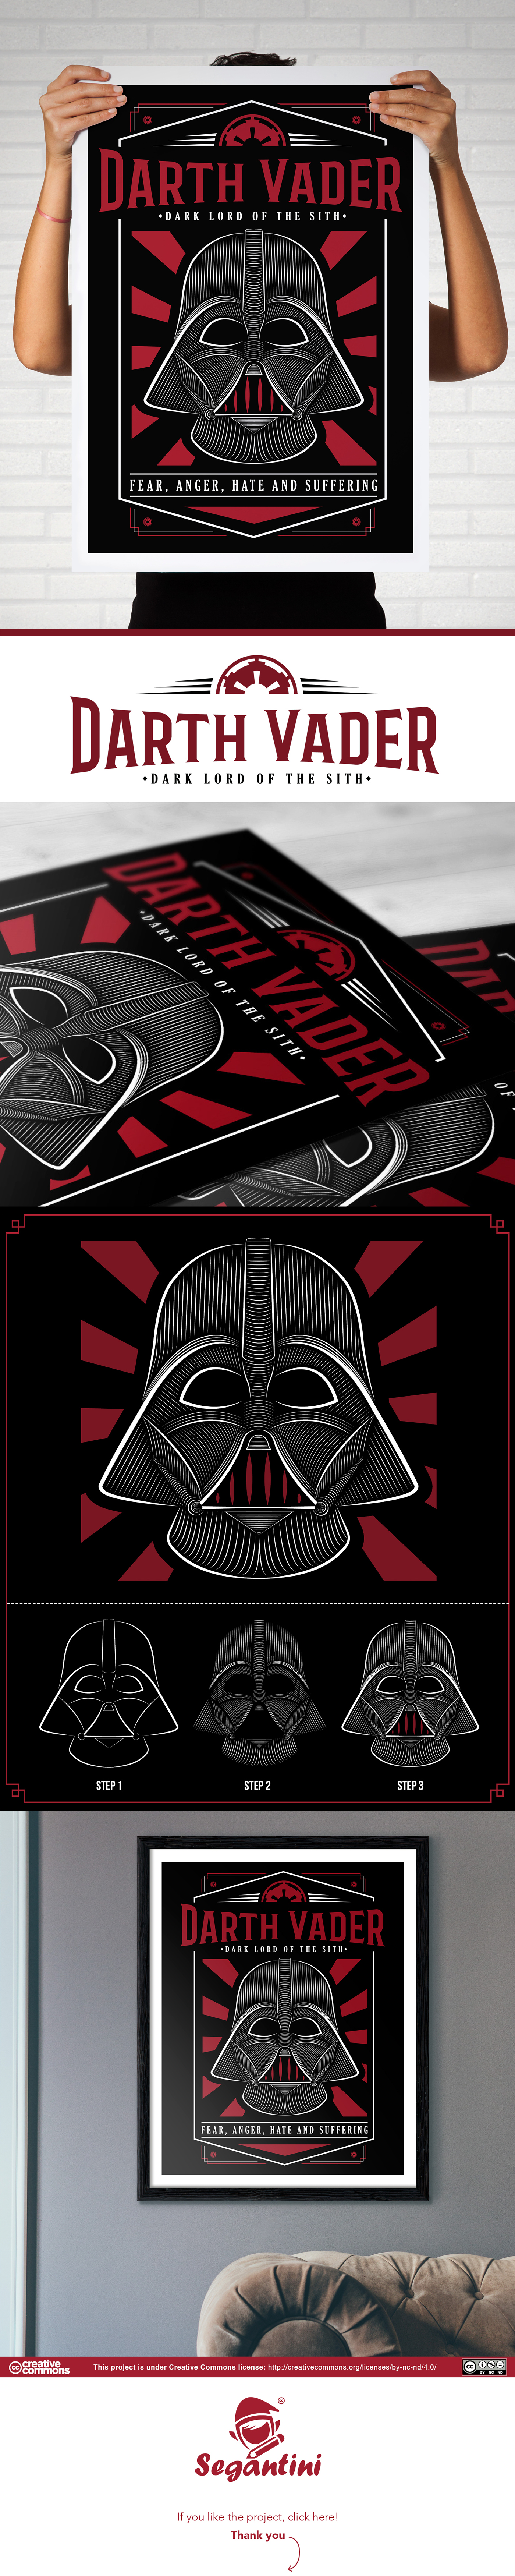 star wars darth vader font poster vector Style t-shirt appareal design Project lines Volume red flat minimalist